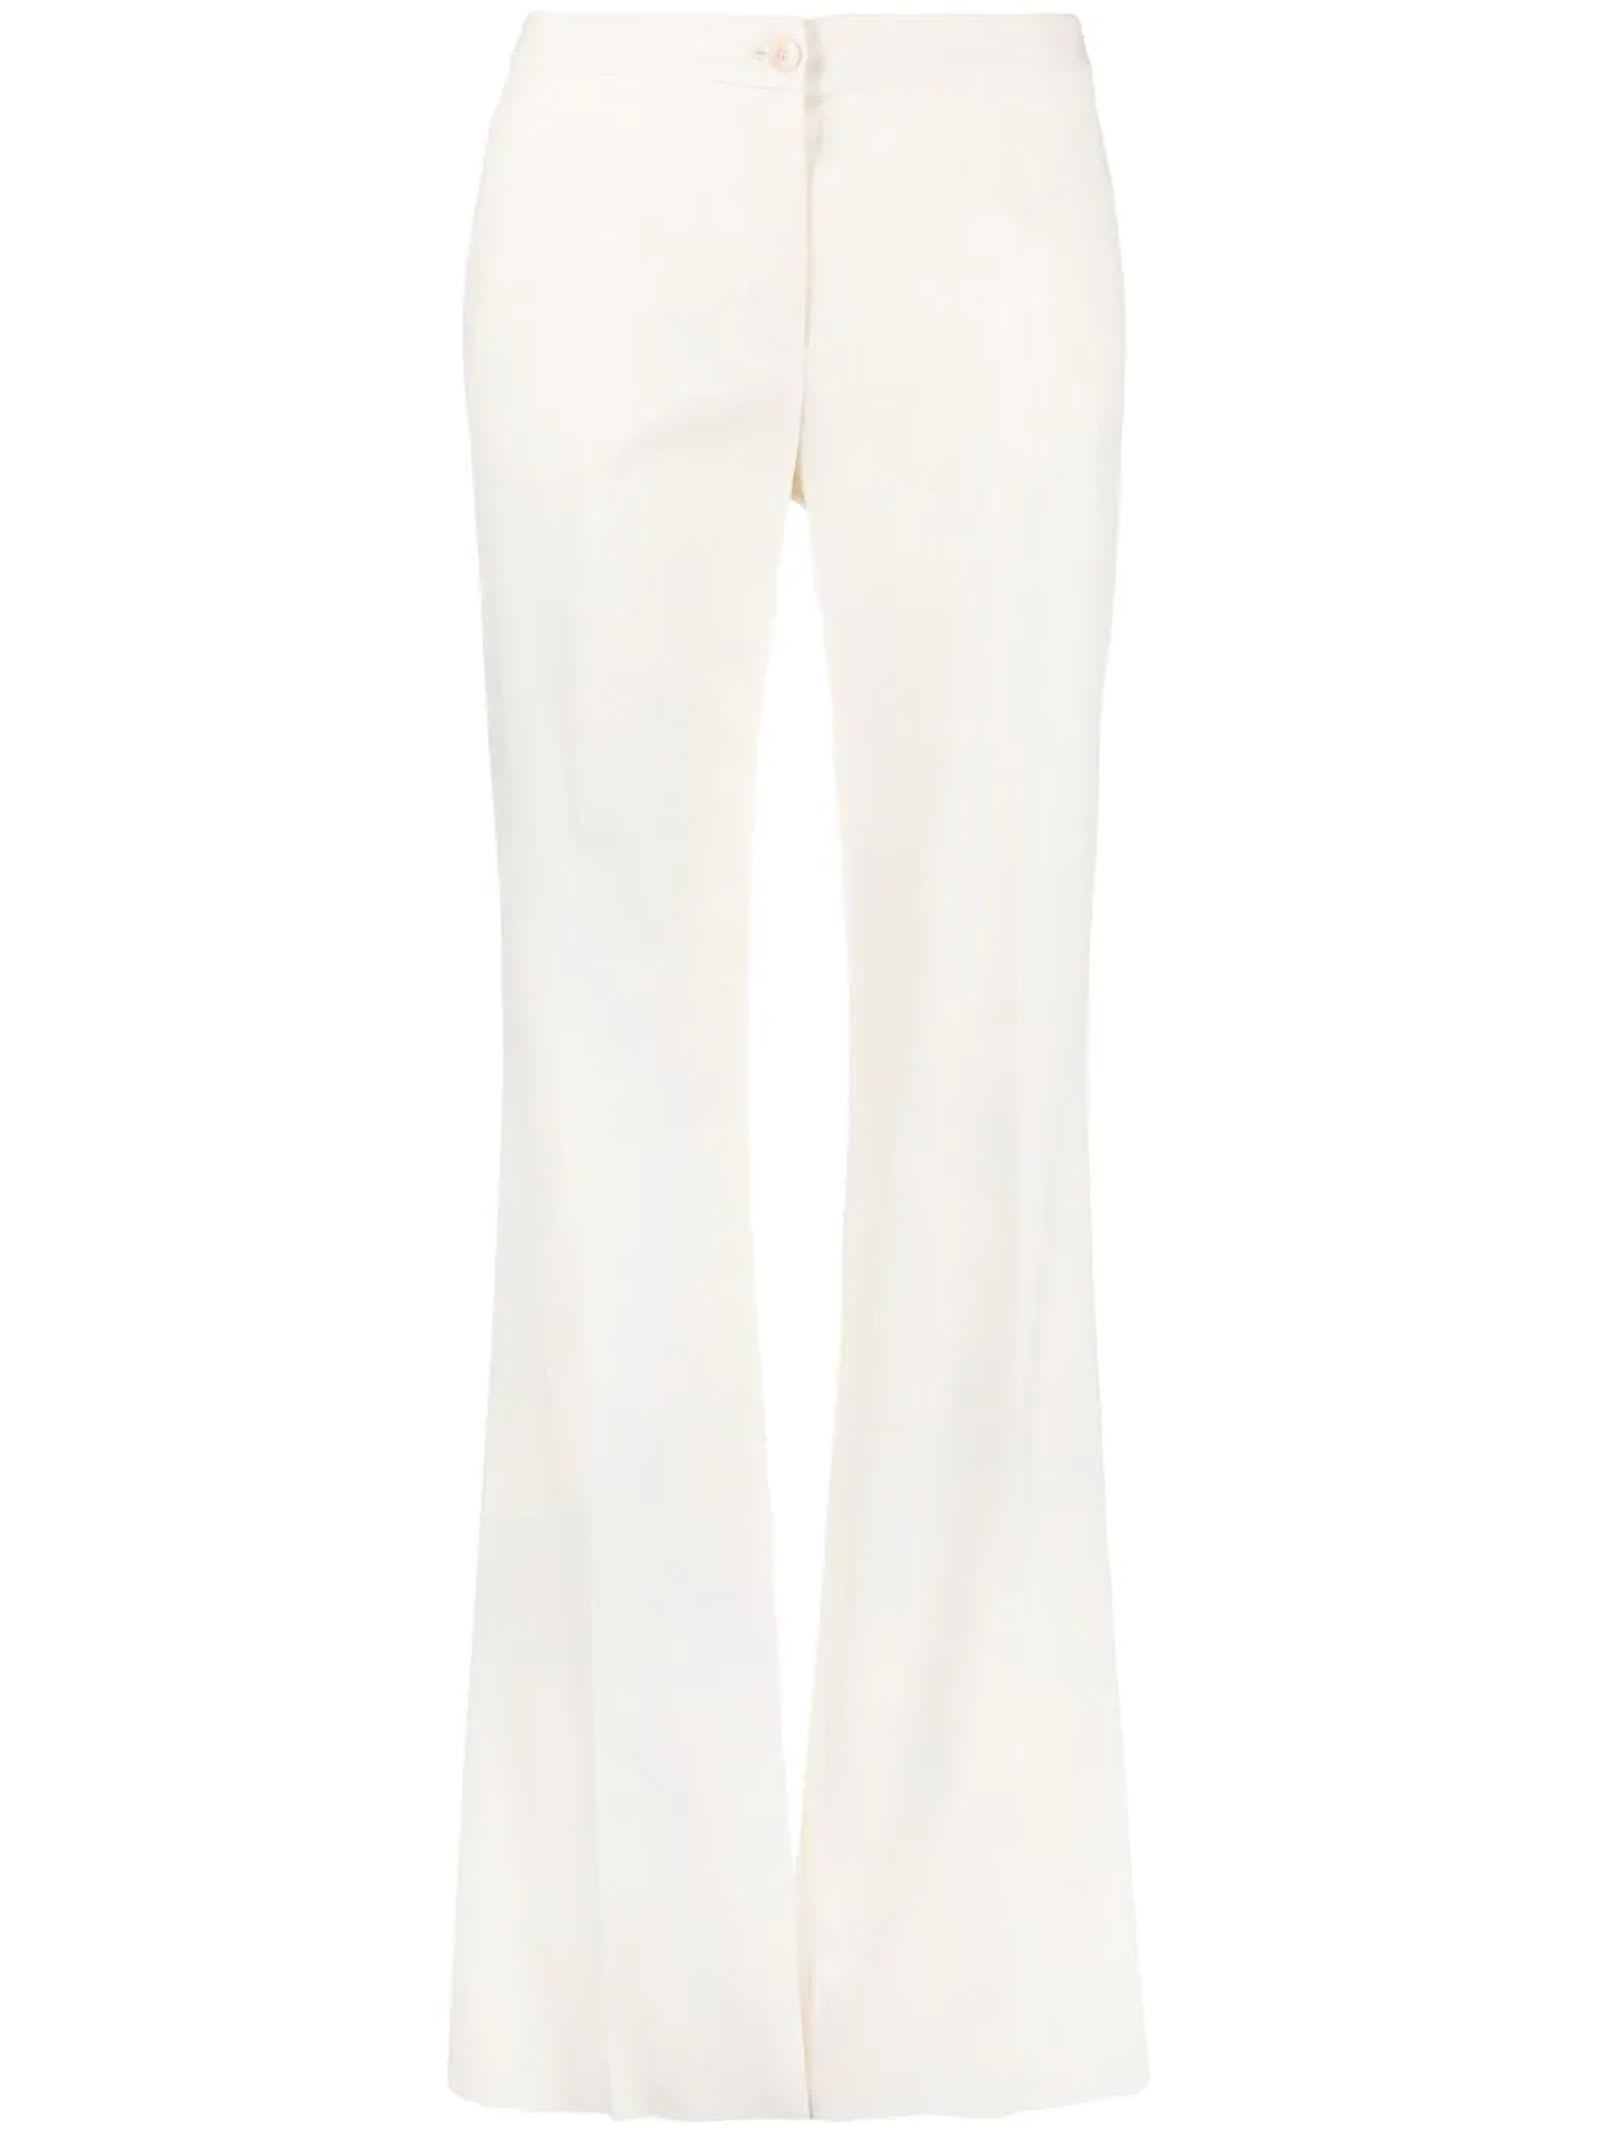 Etro Stretch Wool Jacquard Trousers